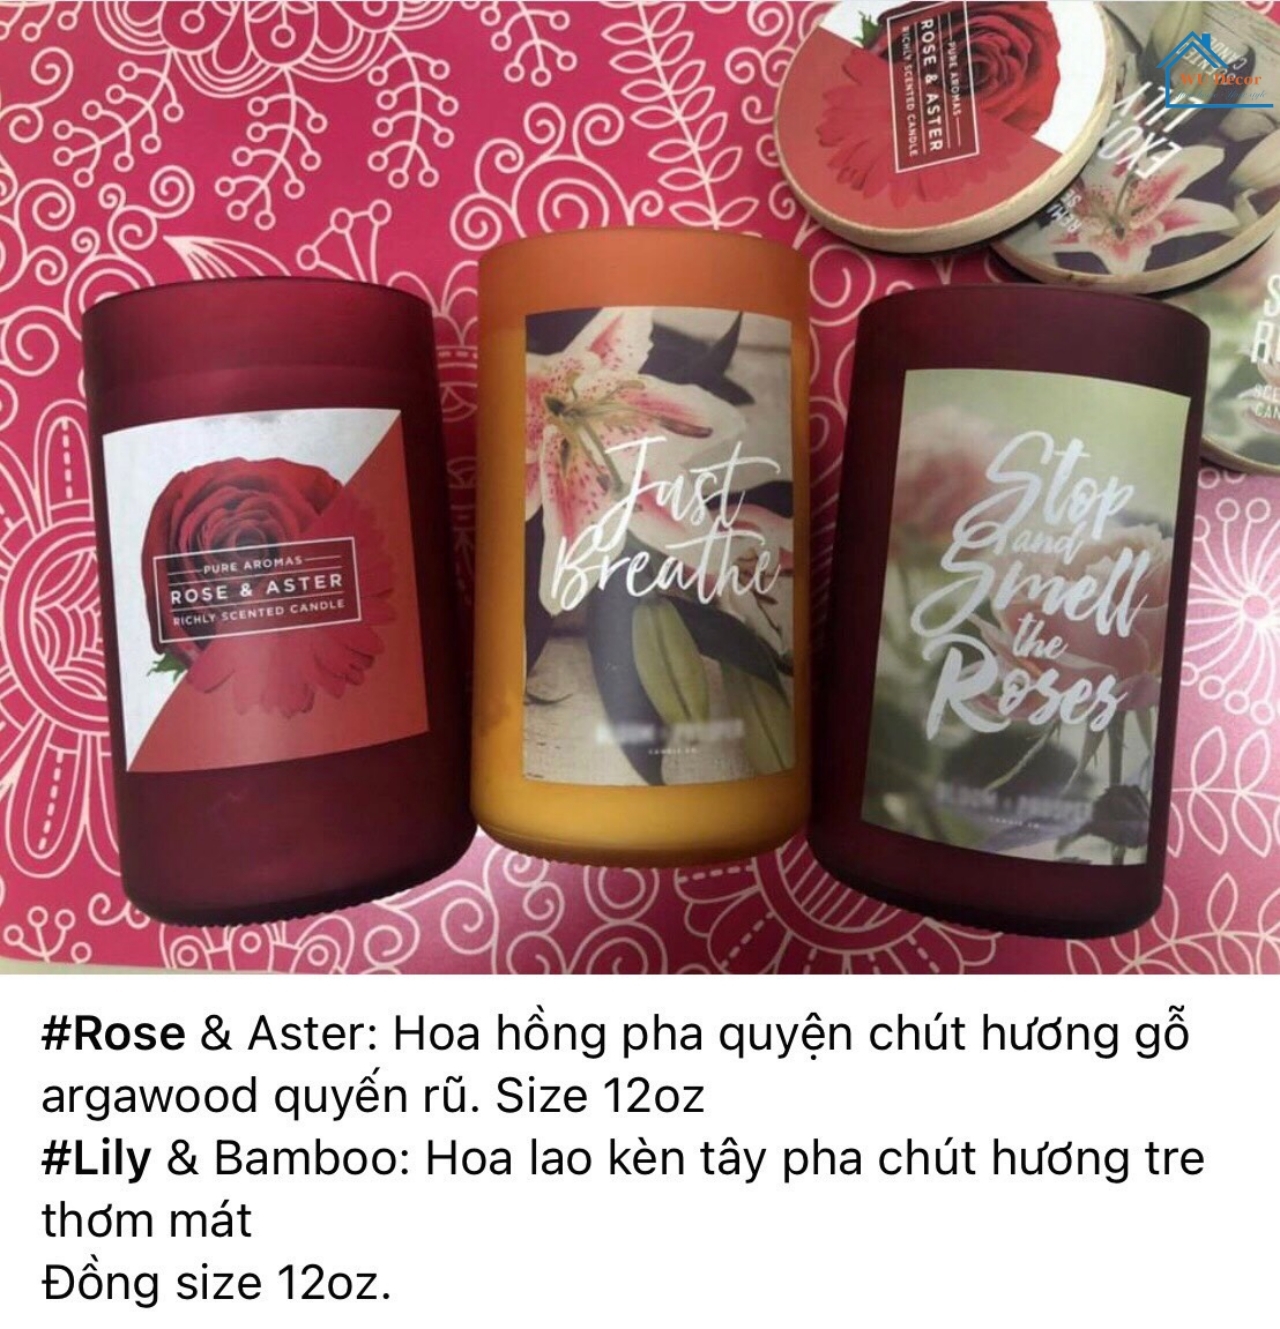 Nến thơm Just breathe exotic lily